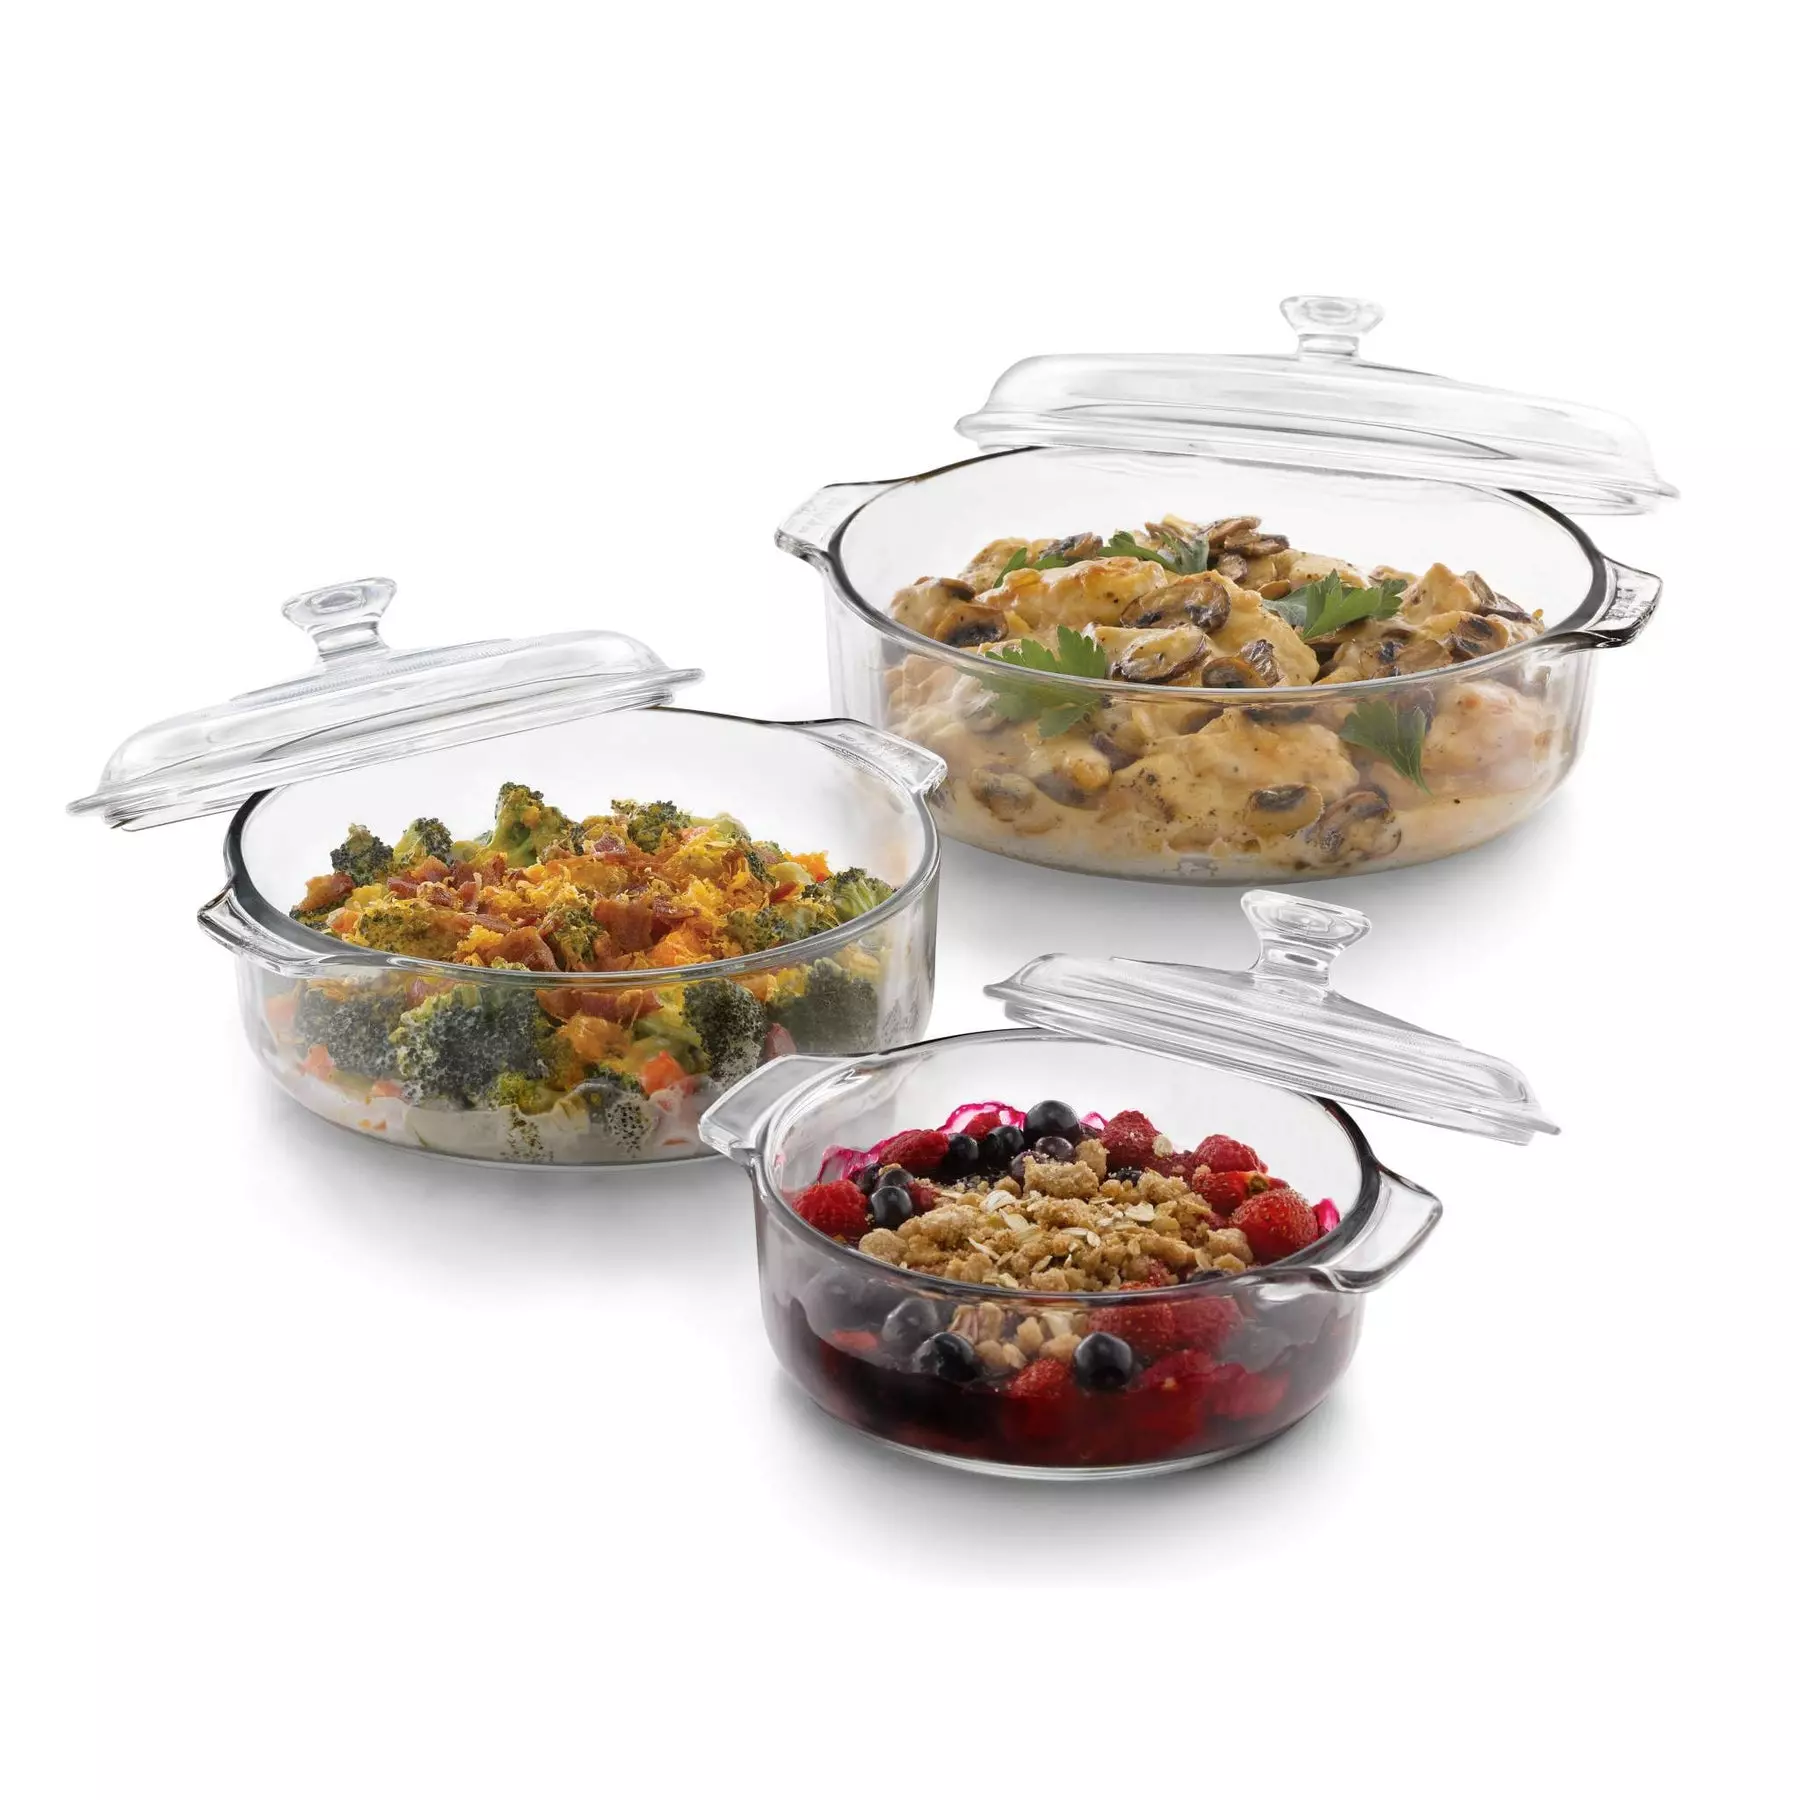 Libbey Bakers Basics Three-Piece Glass Casserole Baking Dish Set With Glass Covers